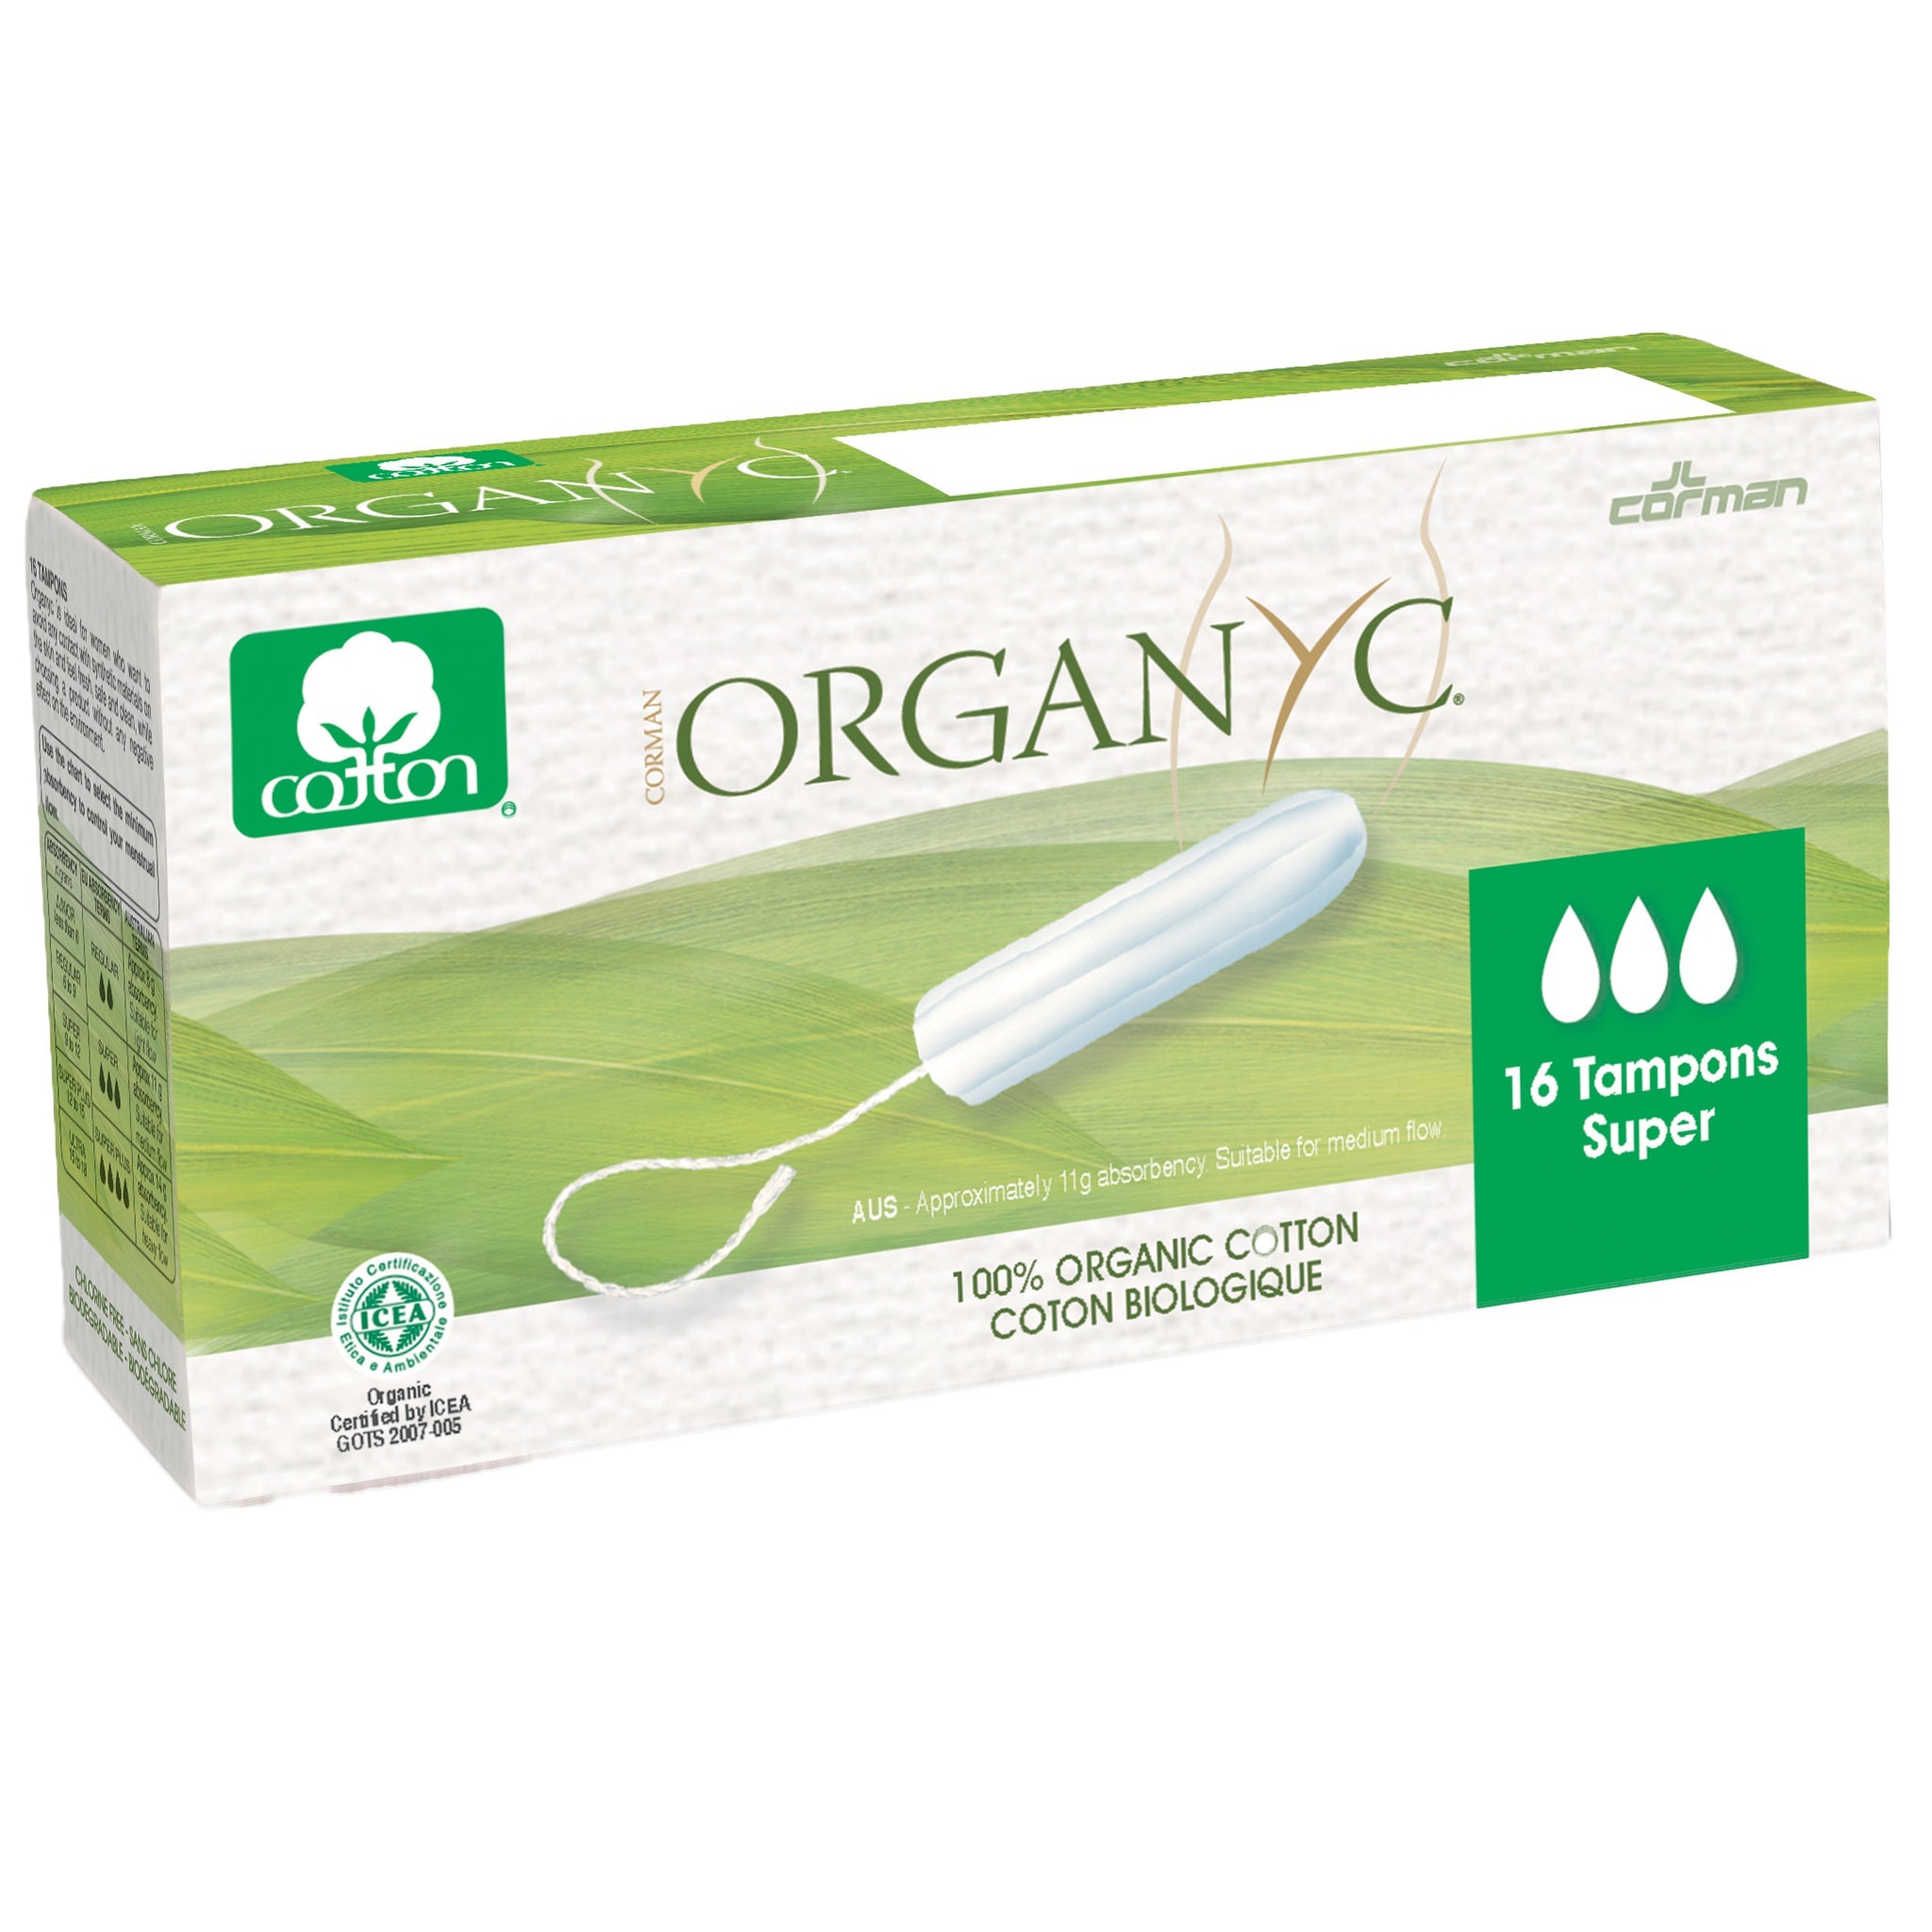 Organic Cotton Tampons Super - mypure.co.uk